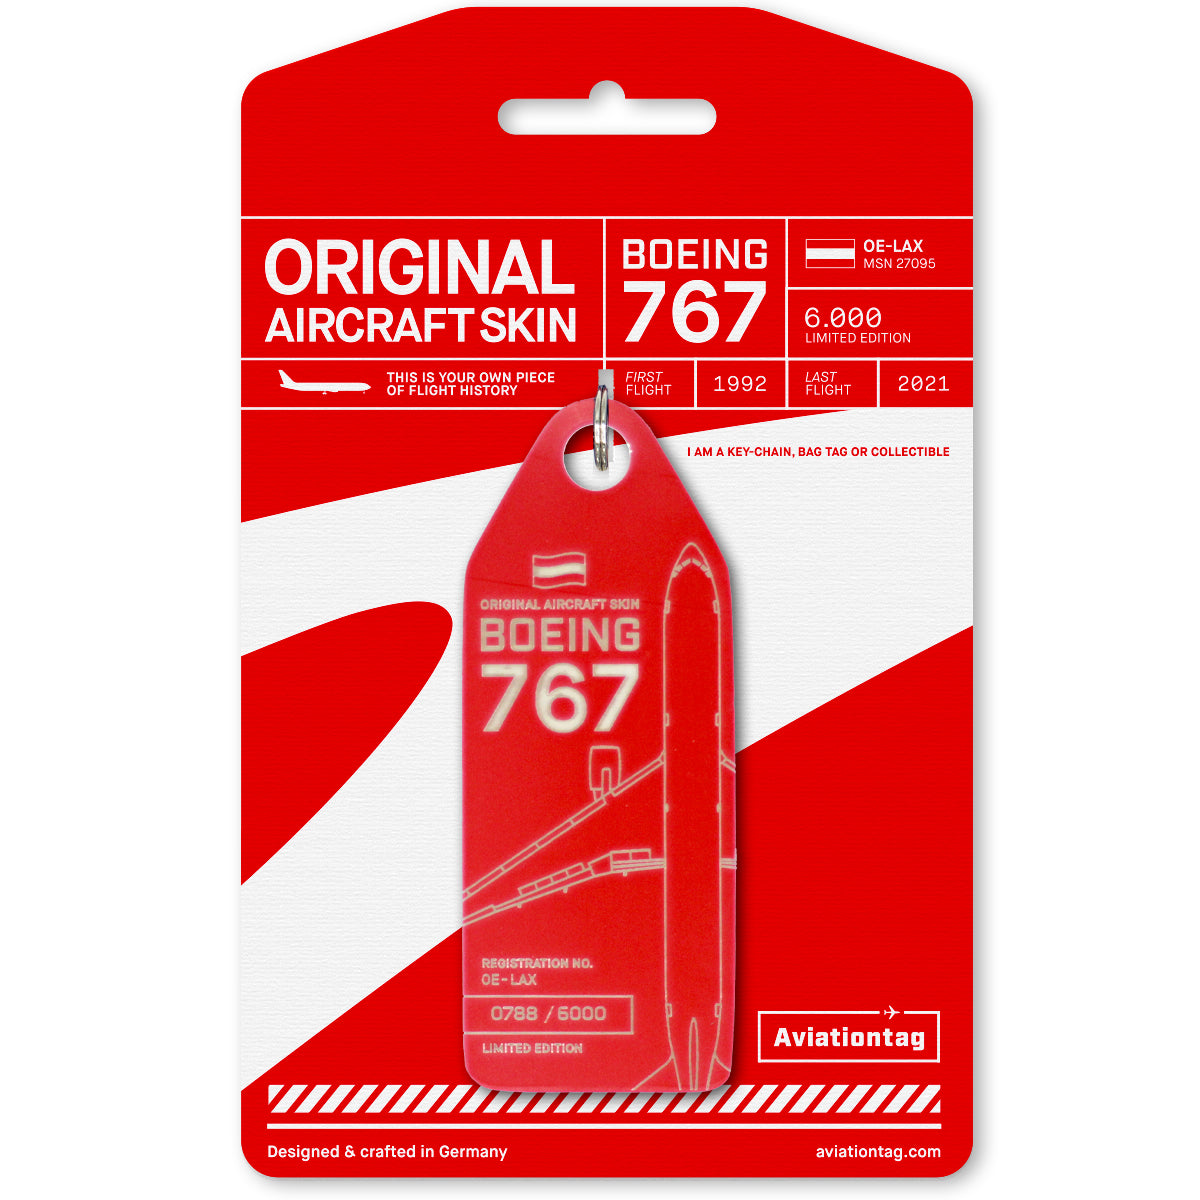 Boeing 767 - OE-LAX - Aviationtag